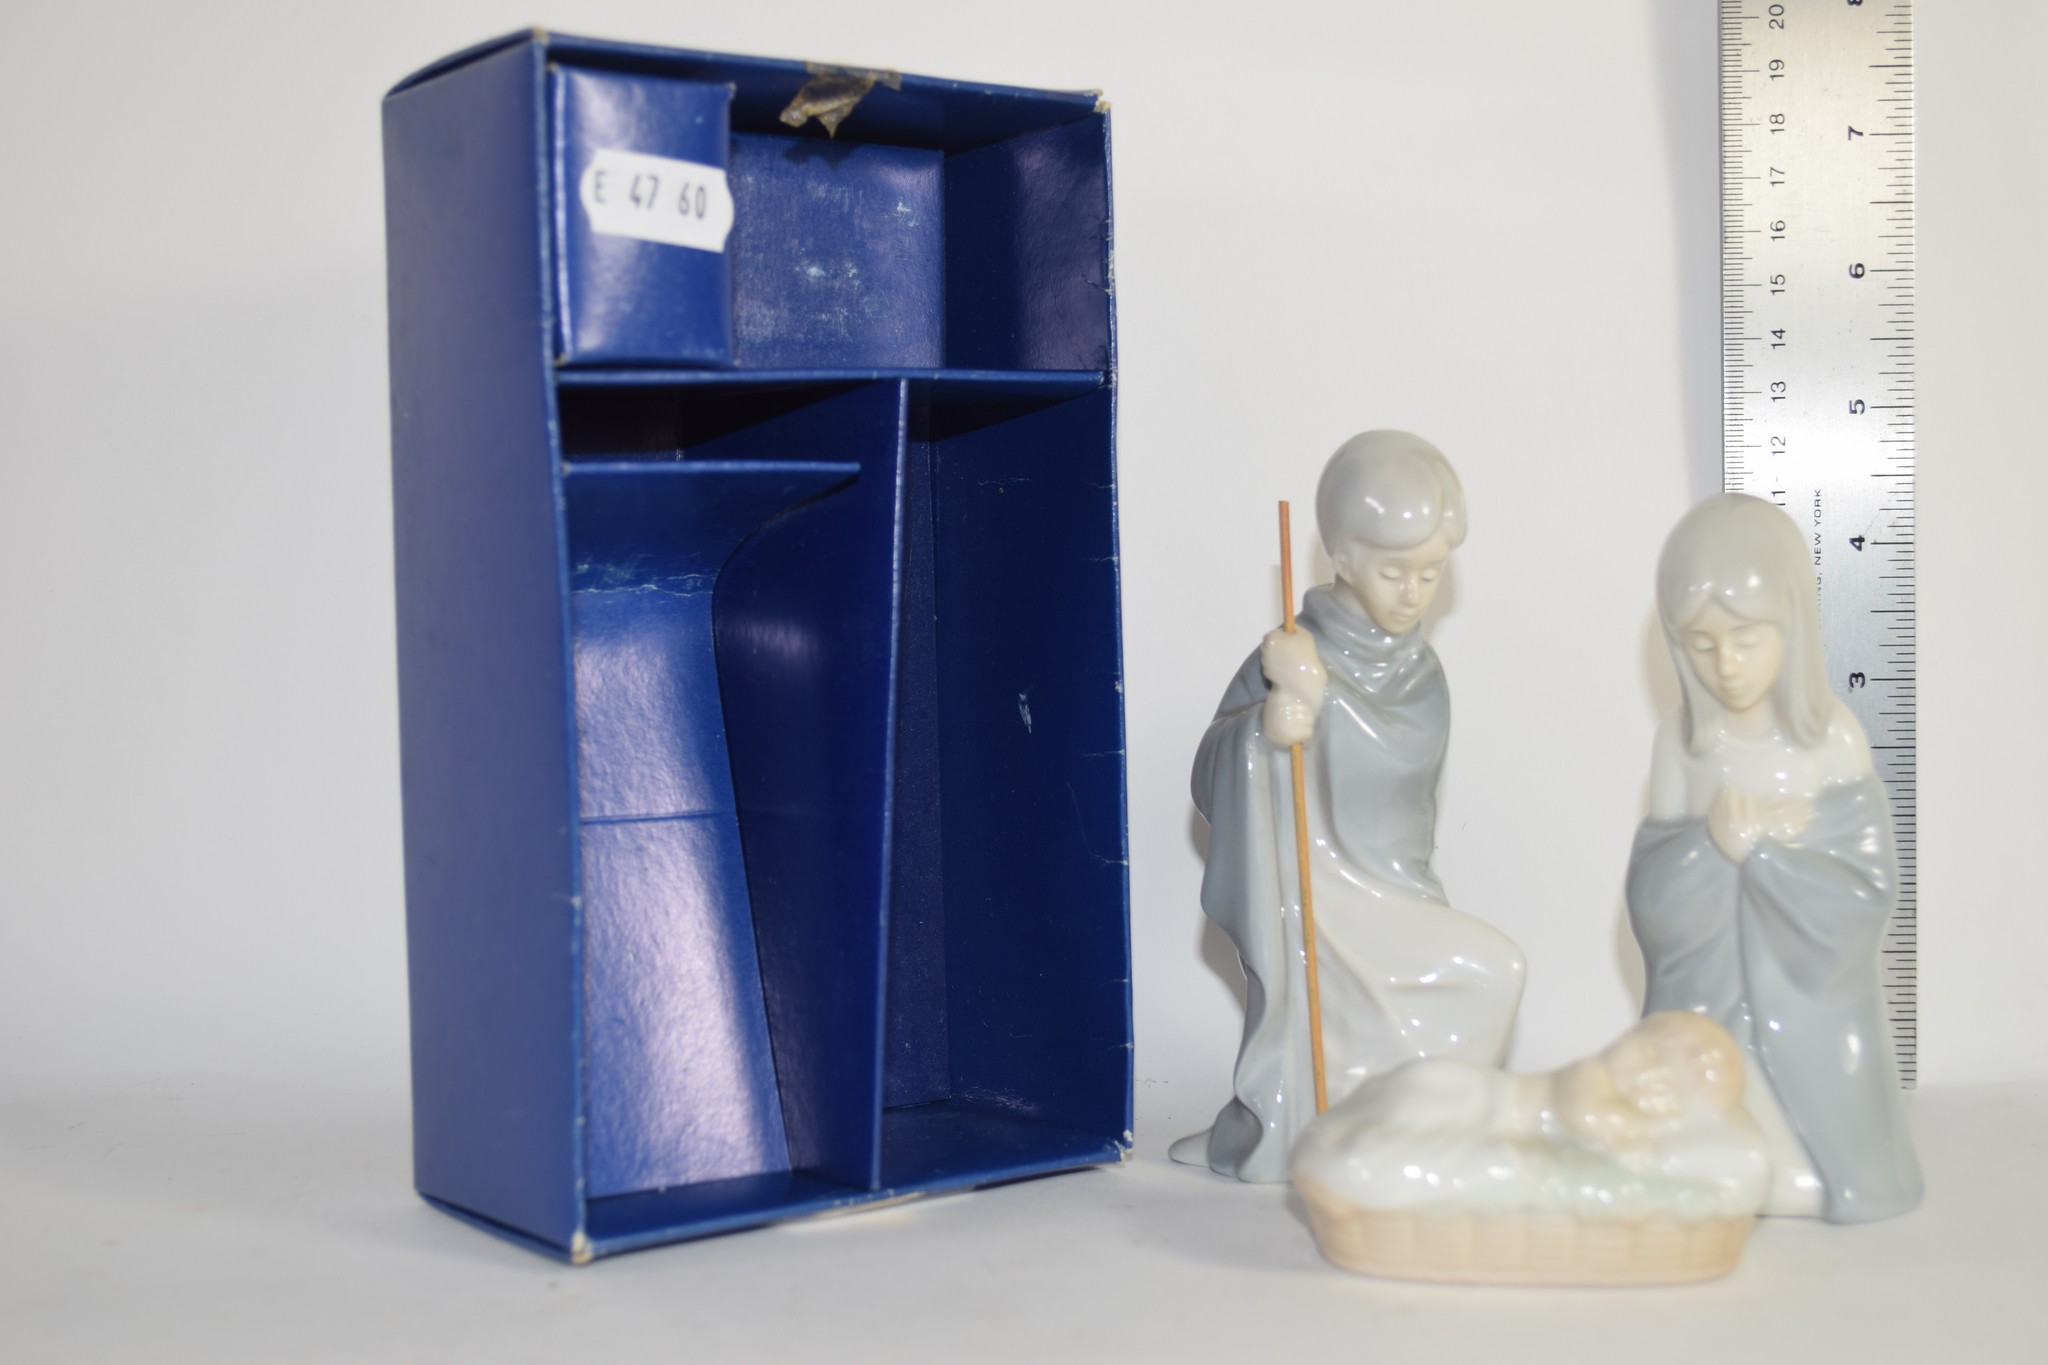 BOXED FIGURES, PROBABLY NATIVITY